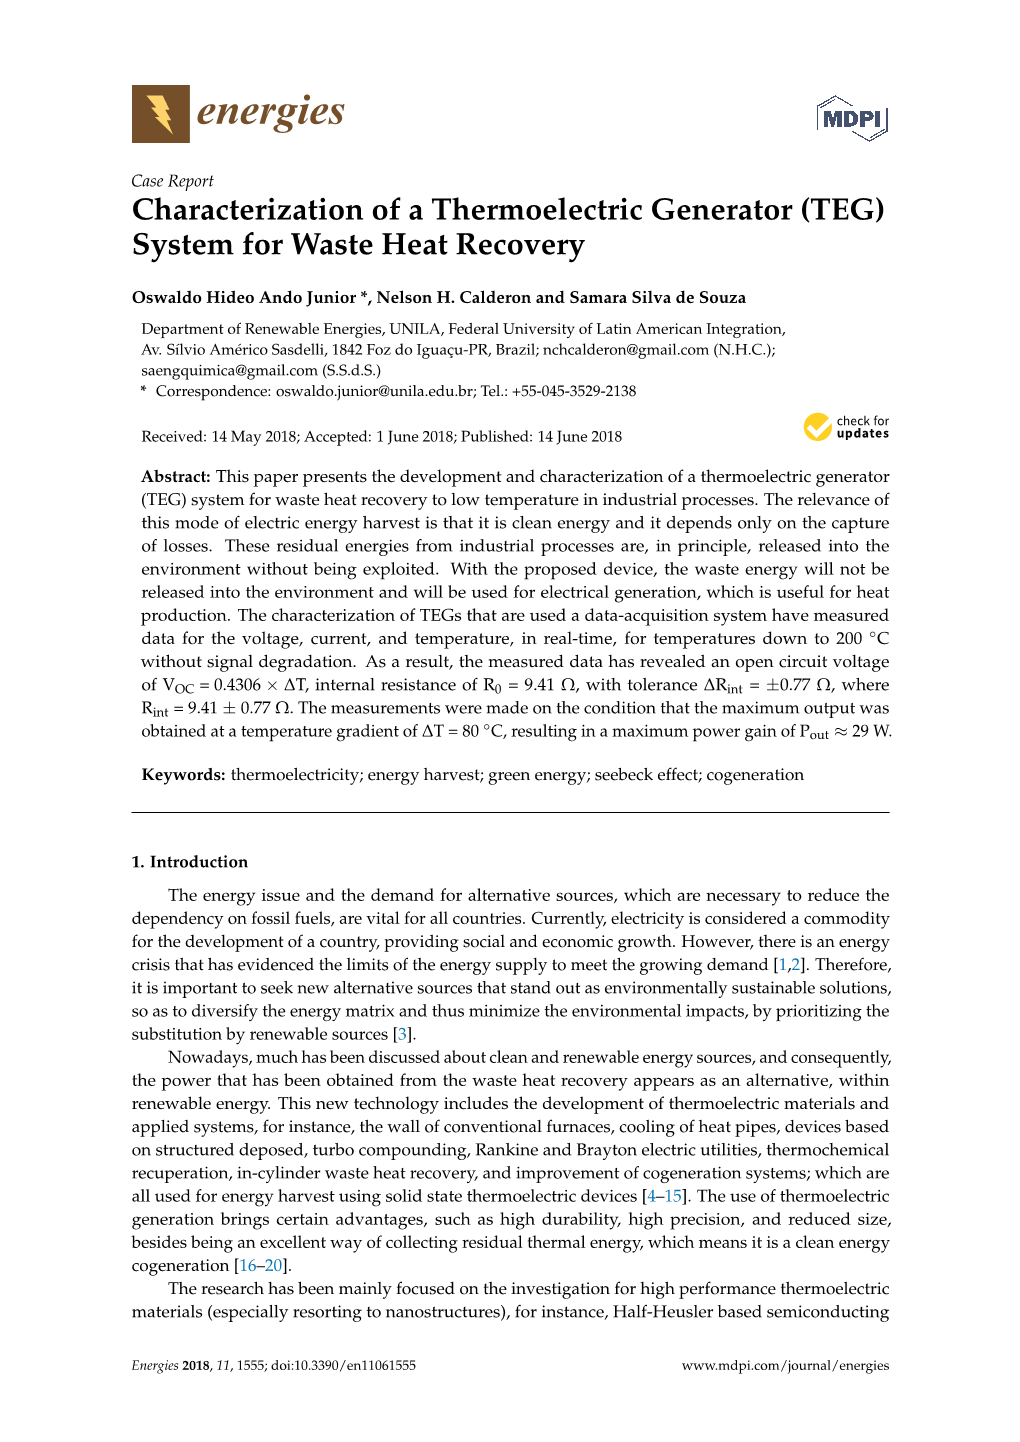 Characterization of a Thermoelectric Generator (TEG) System for Waste Heat Recovery